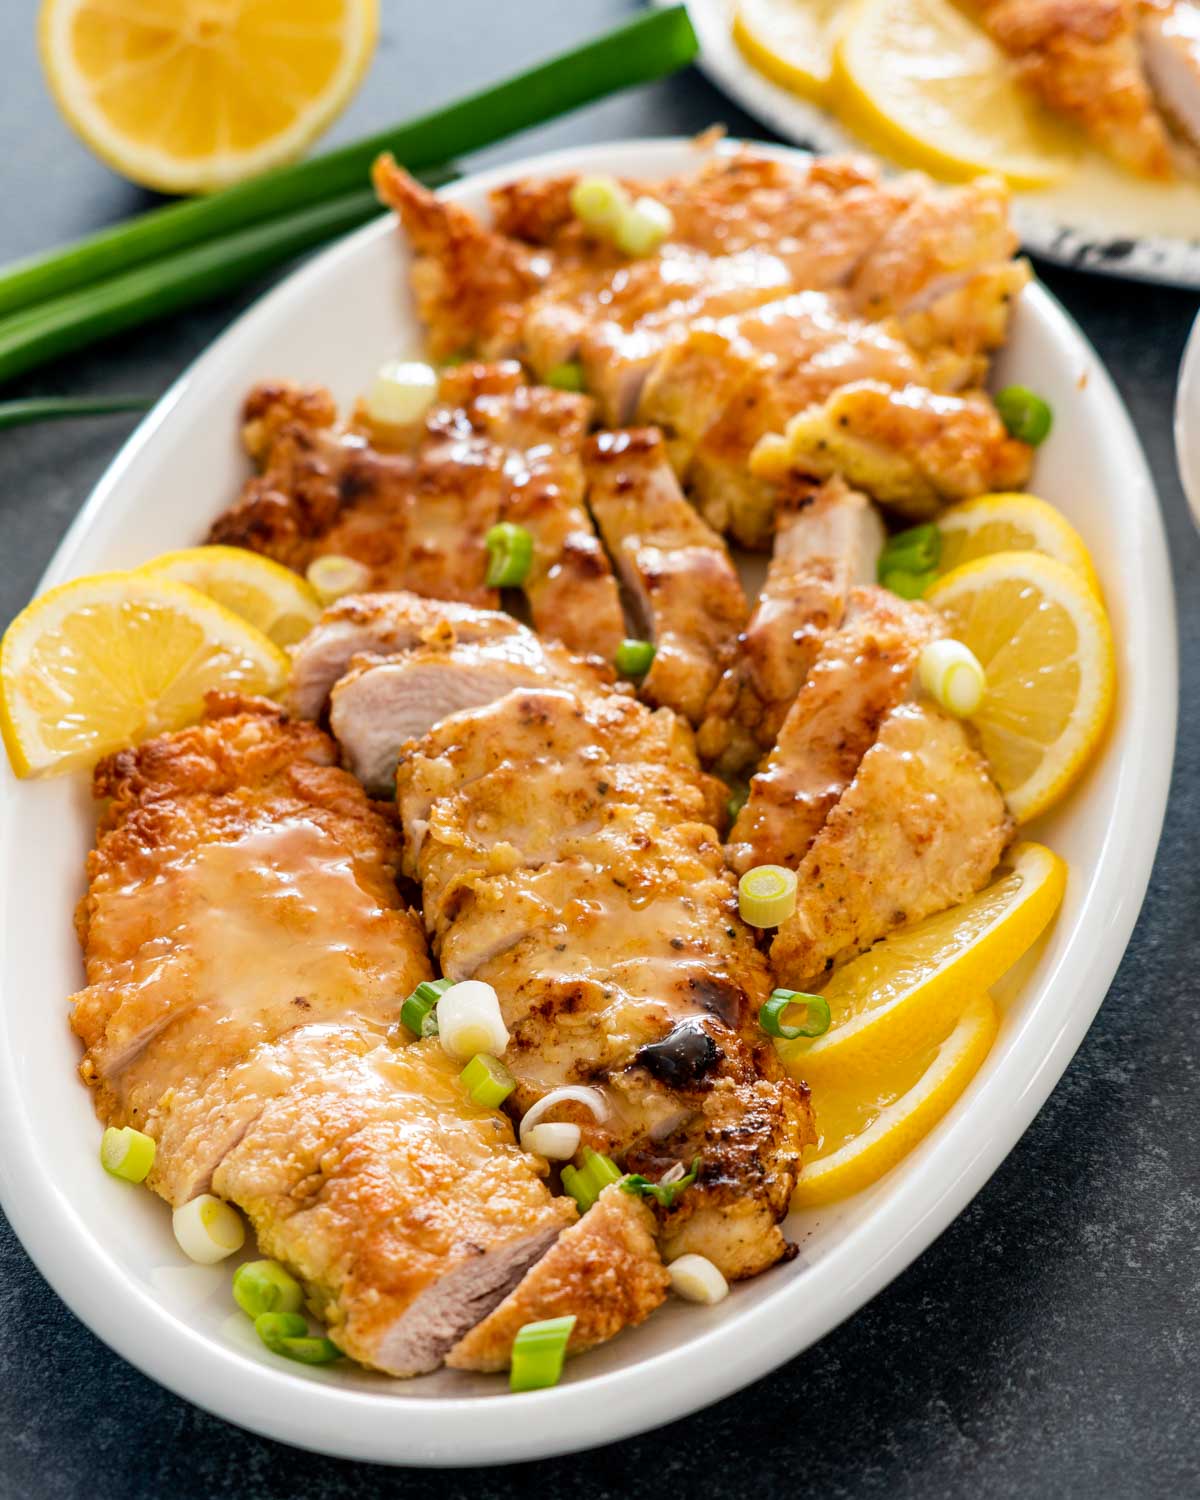 This Sticky Chinese Lemon Chicken Recipe Is So Good You Will Want to Make It Every Night for Dinner  